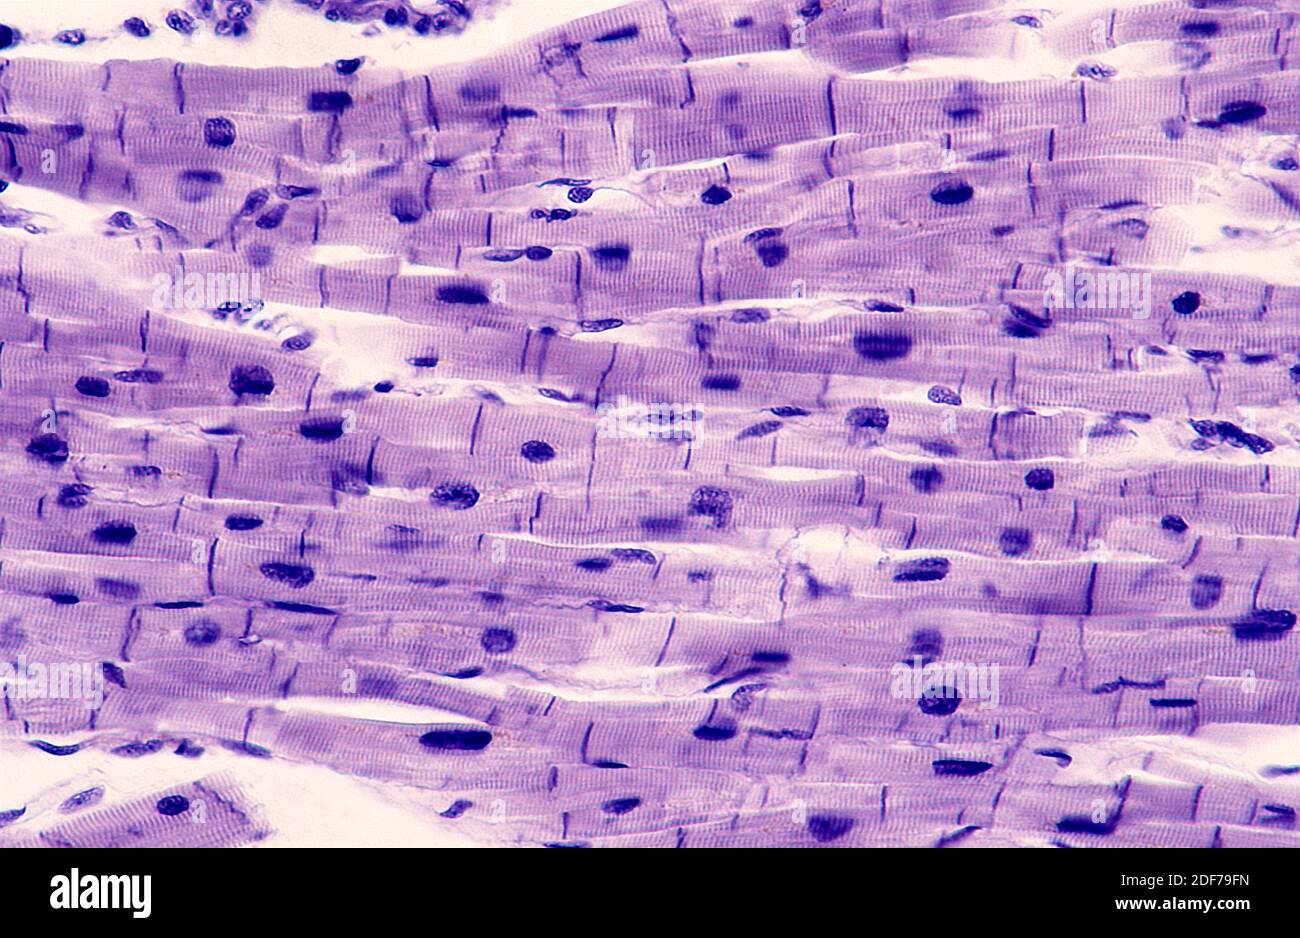 Cardiac muscle showing cells, nucleous and sarcomeres. Photomicrograph. Stock Photo